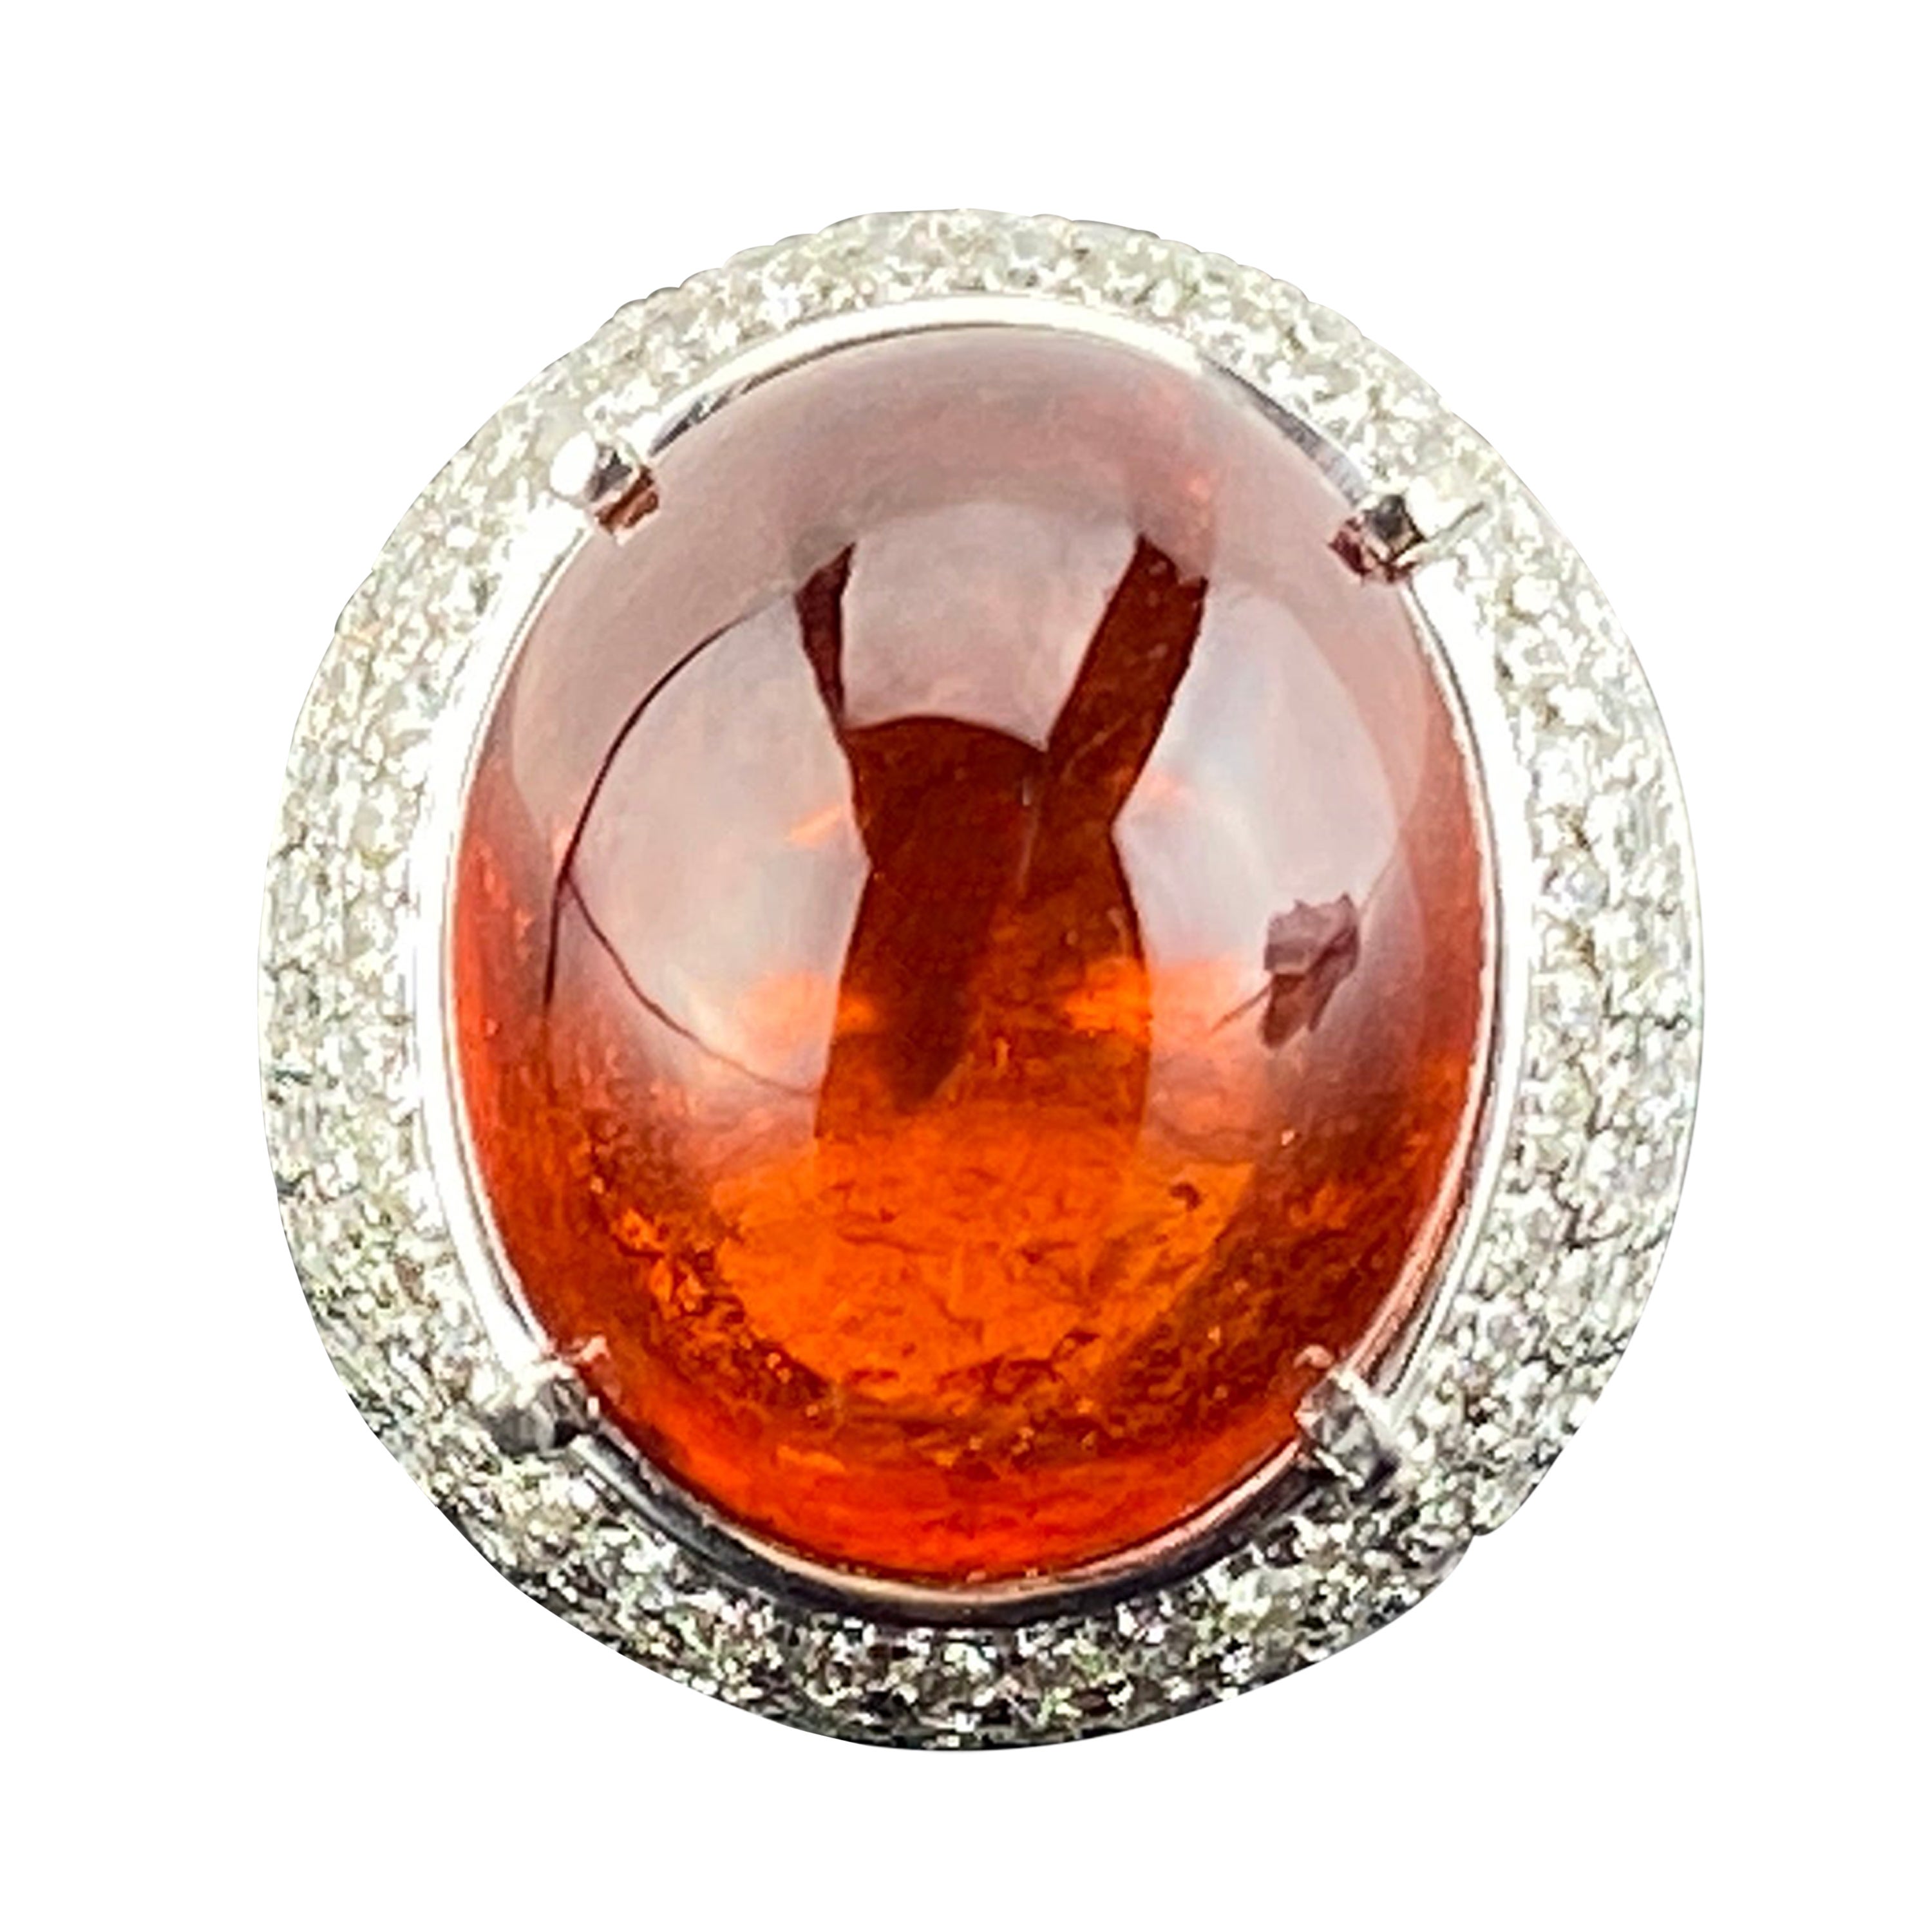 Mandarin Garnet Spessatite Cabochon Cocktail Ring With Diamonds And 18K Gold  For Sale